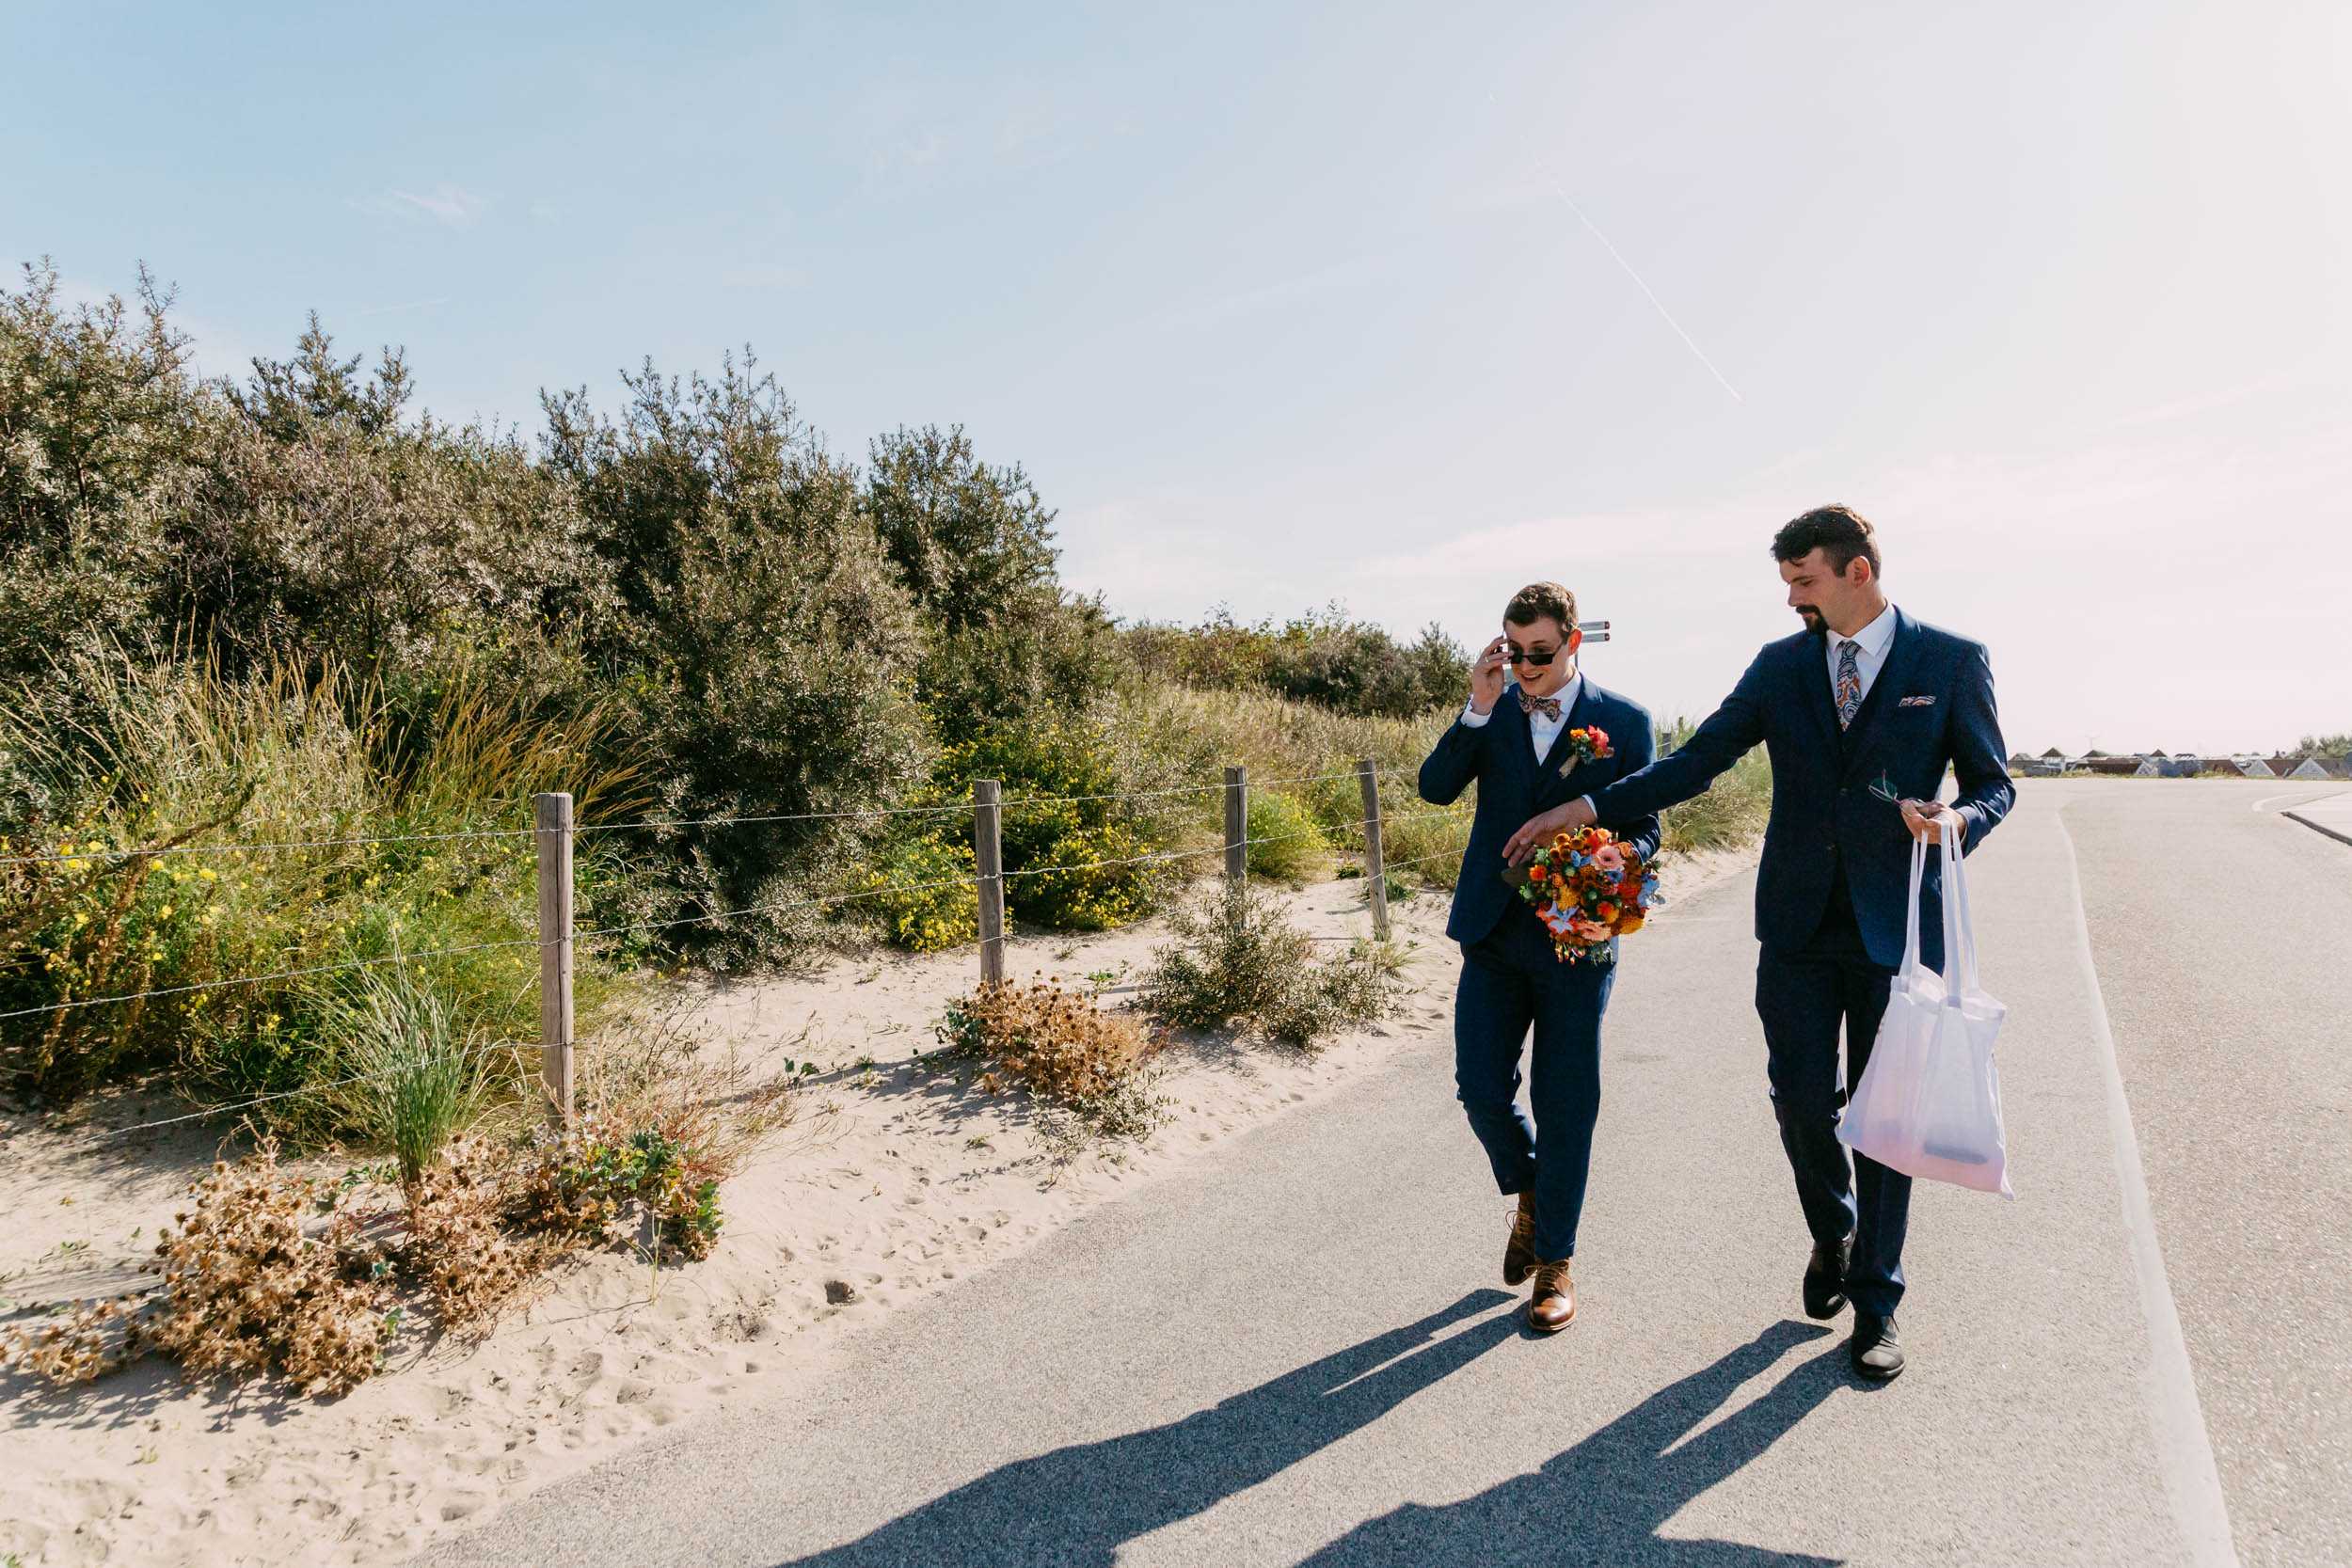 Two men in suits walk along a beach road.